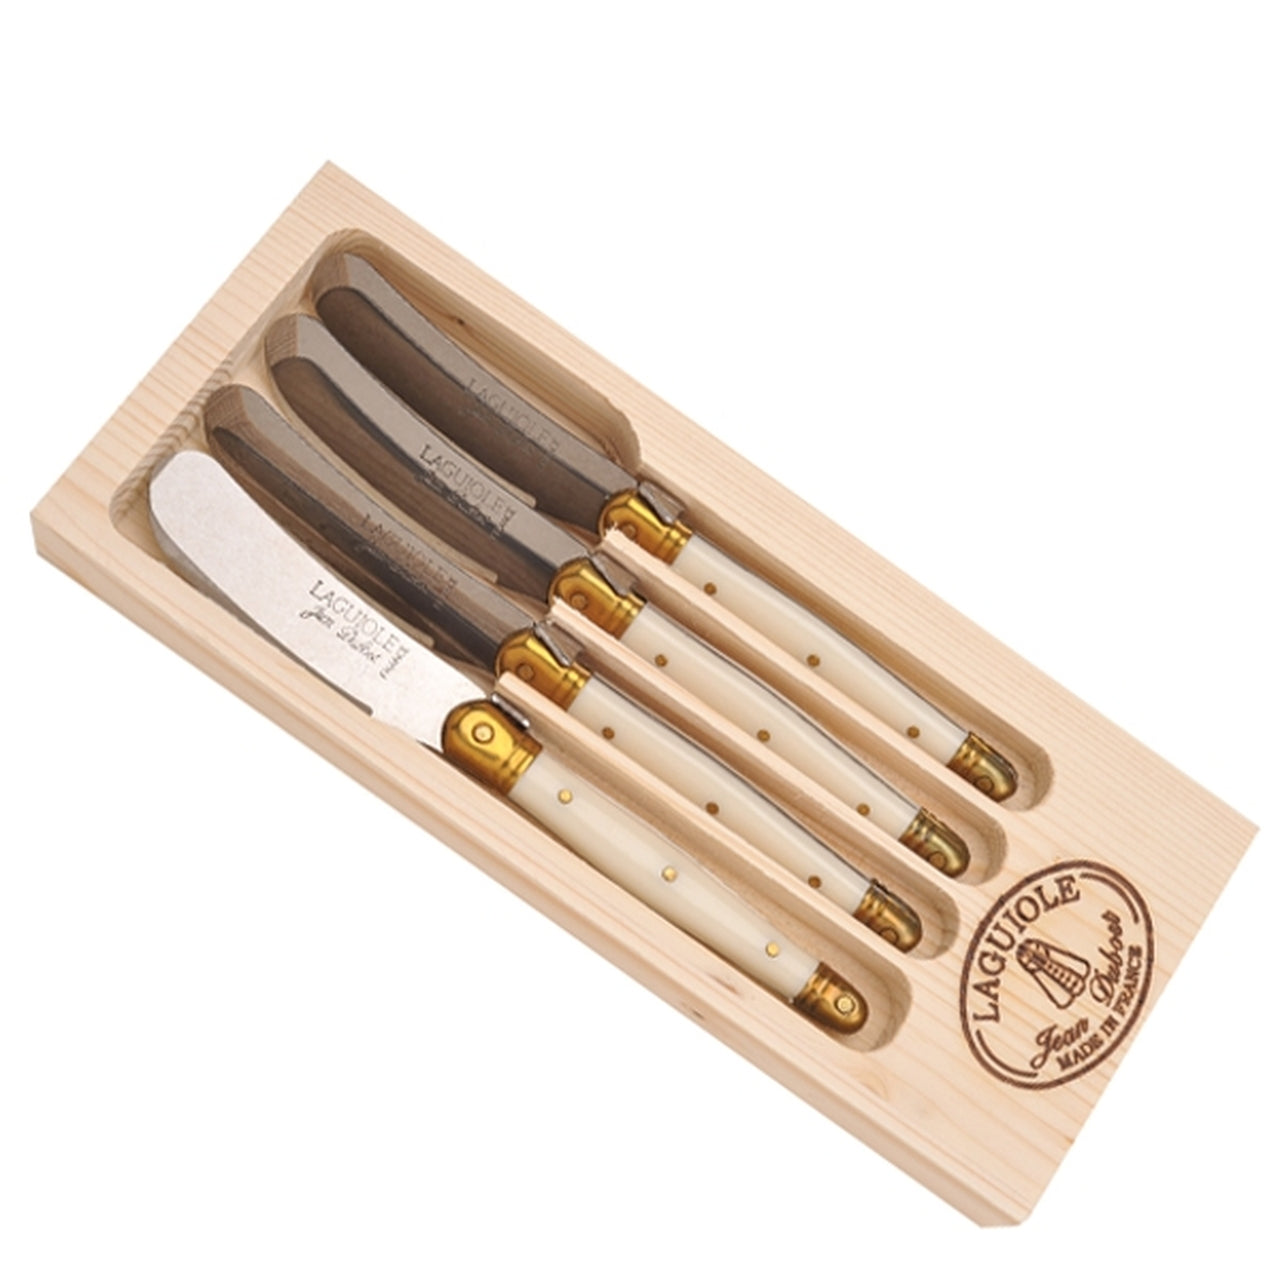 Jean Dubost 4 Spreaders with Ivory colored handles in a Wooden Box